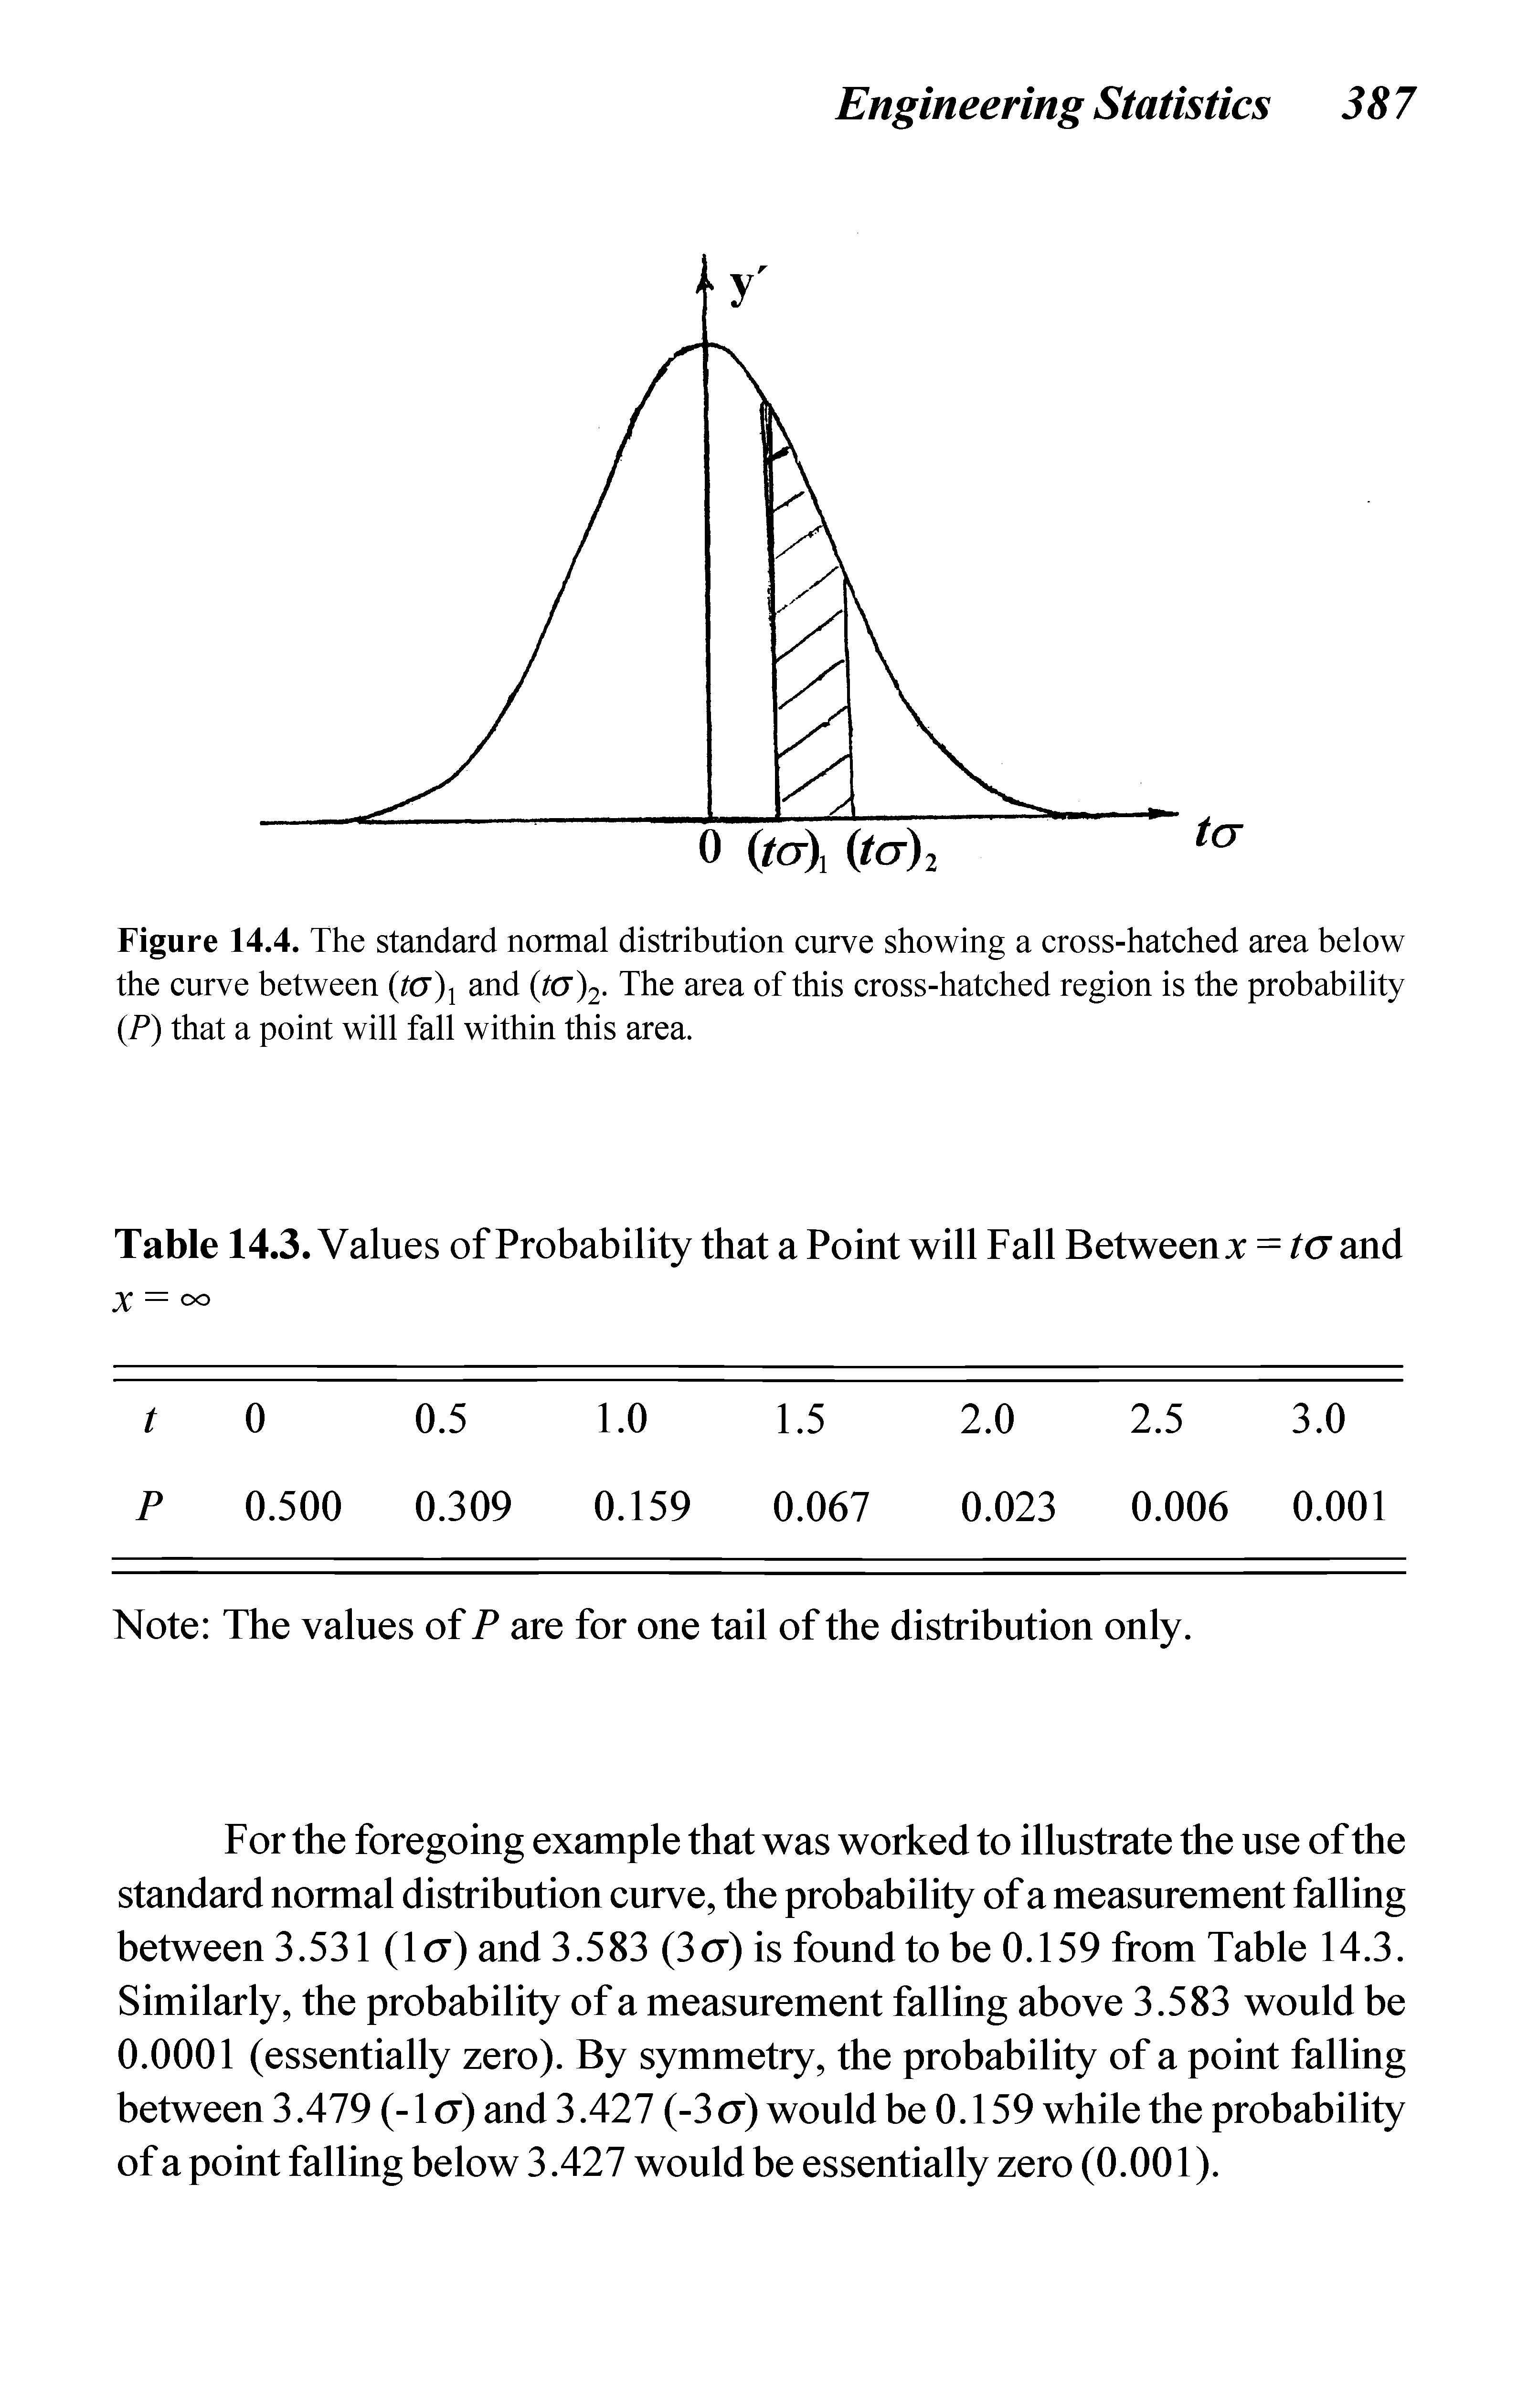 Figure 14.4. The standard normal distribution curve showing a cross-hatched area below the curve between ta)i and (10)2. The area of this cross-hatched region is the probability (P) that a point will fall within this area.